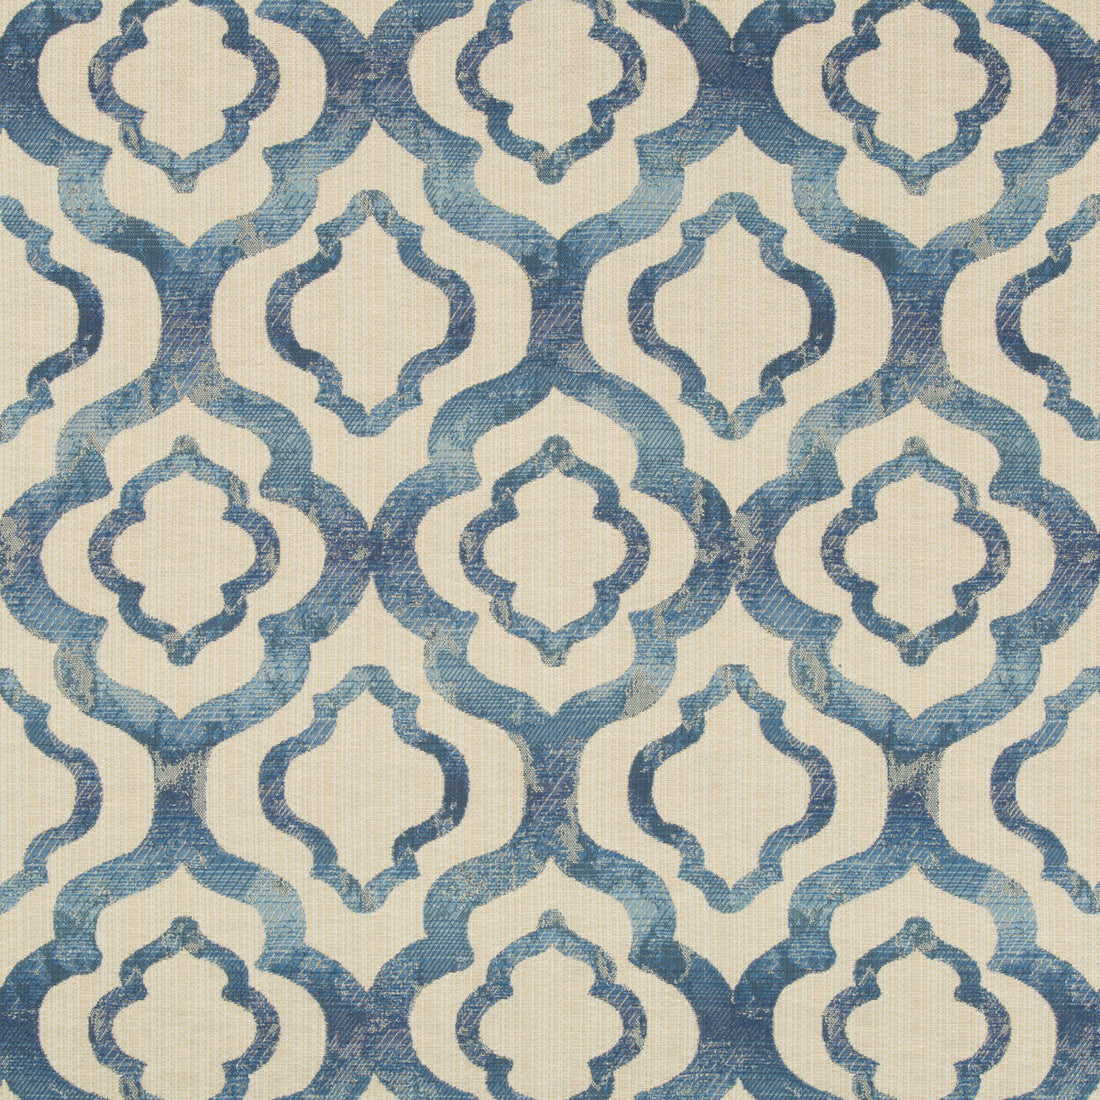 Kravet Design fabric in 34681-15 color - pattern 34681.15.0 - by Kravet Design in the Performance Crypton Home collection